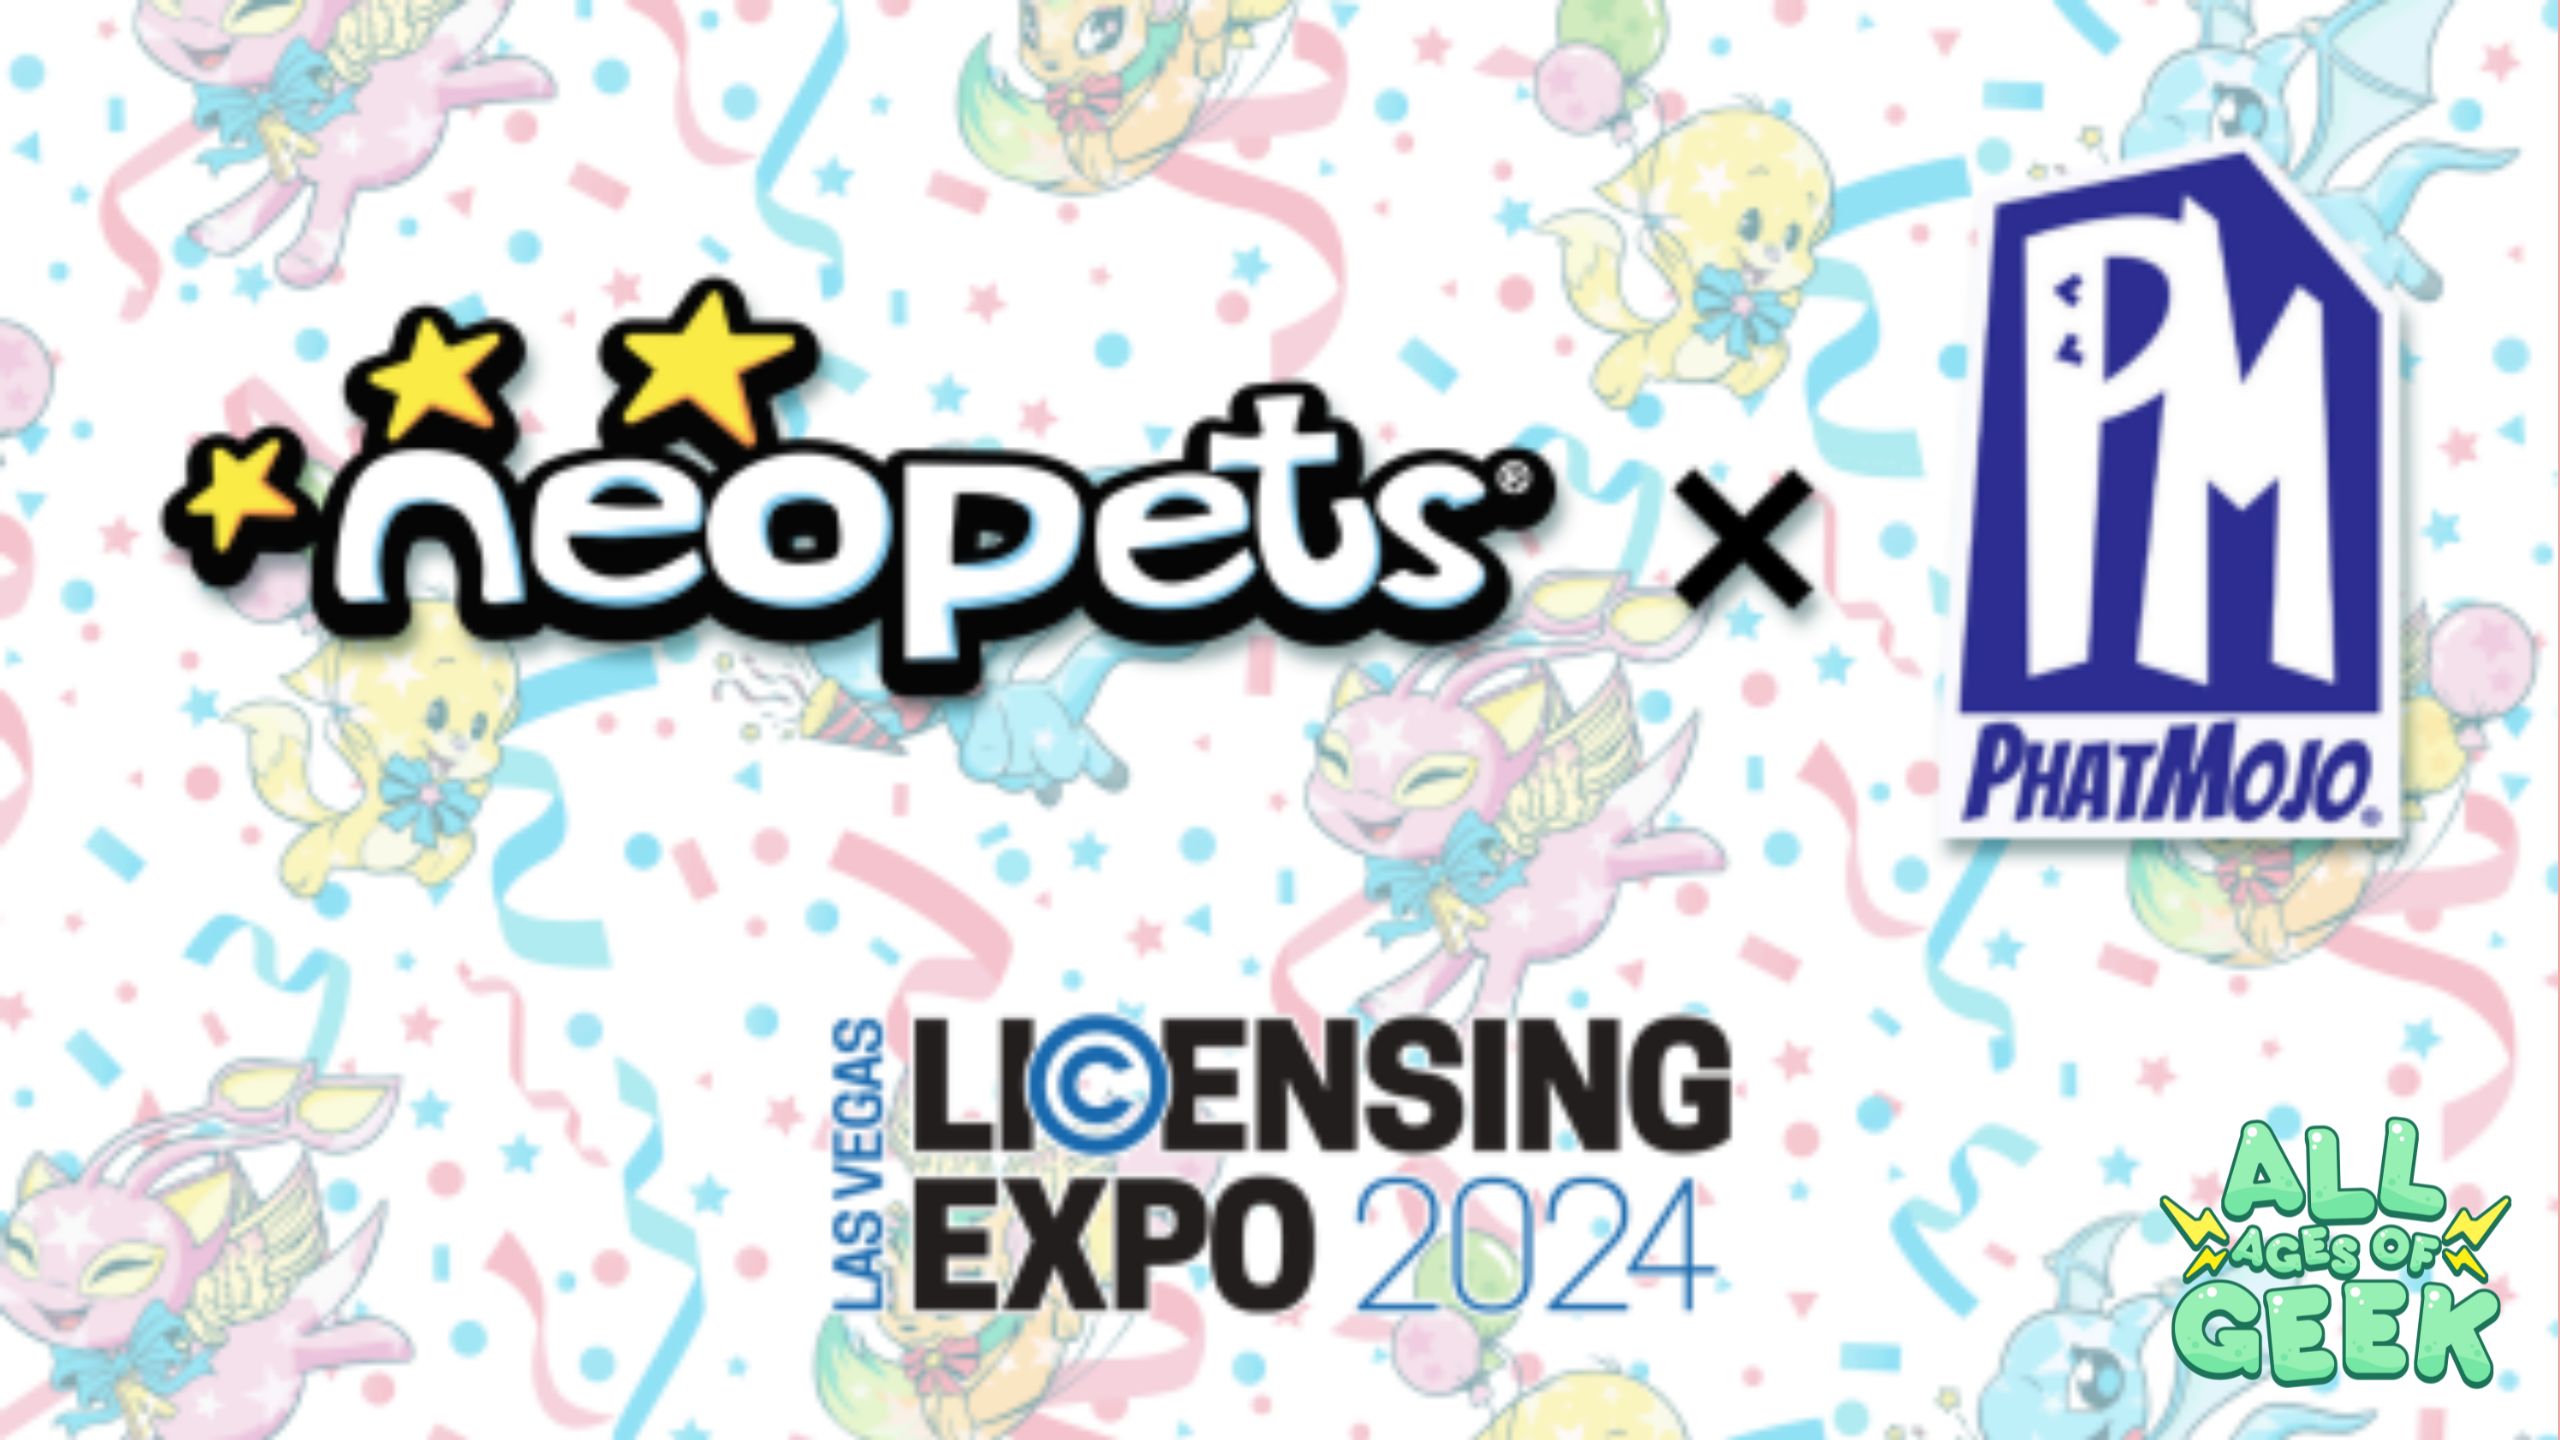 Neopets Announces New Non-Exclusive Master Toy Deal at Licensing Expo 2024